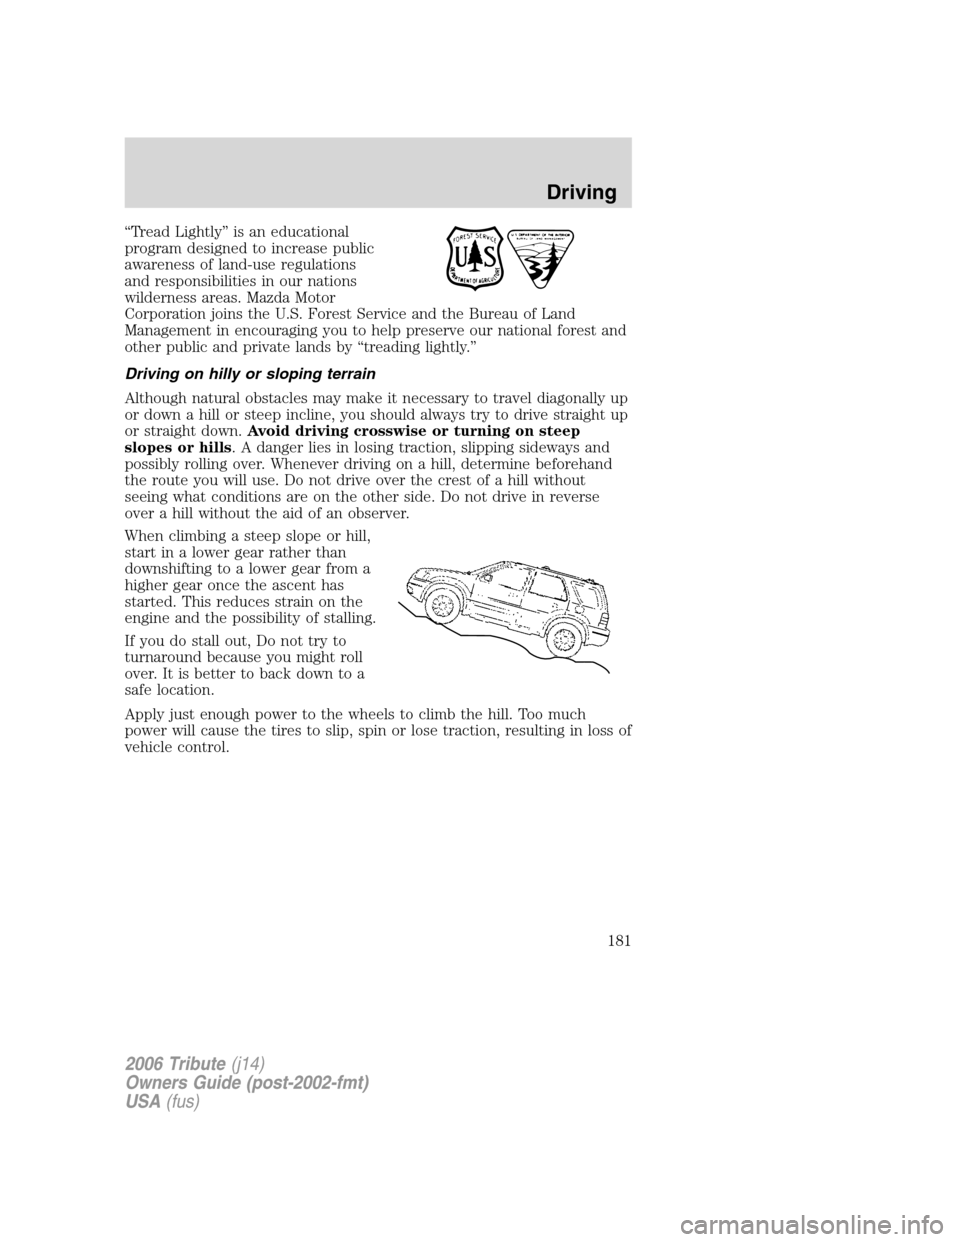 MAZDA MODEL TRIBUTE 2006  Owners Manual (in English) “Tread Lightly” is an educational
program designed to increase public
awareness of land-use regulations
and responsibilities in our nations
wilderness areas. Mazda Motor
Corporation joins the U.S.